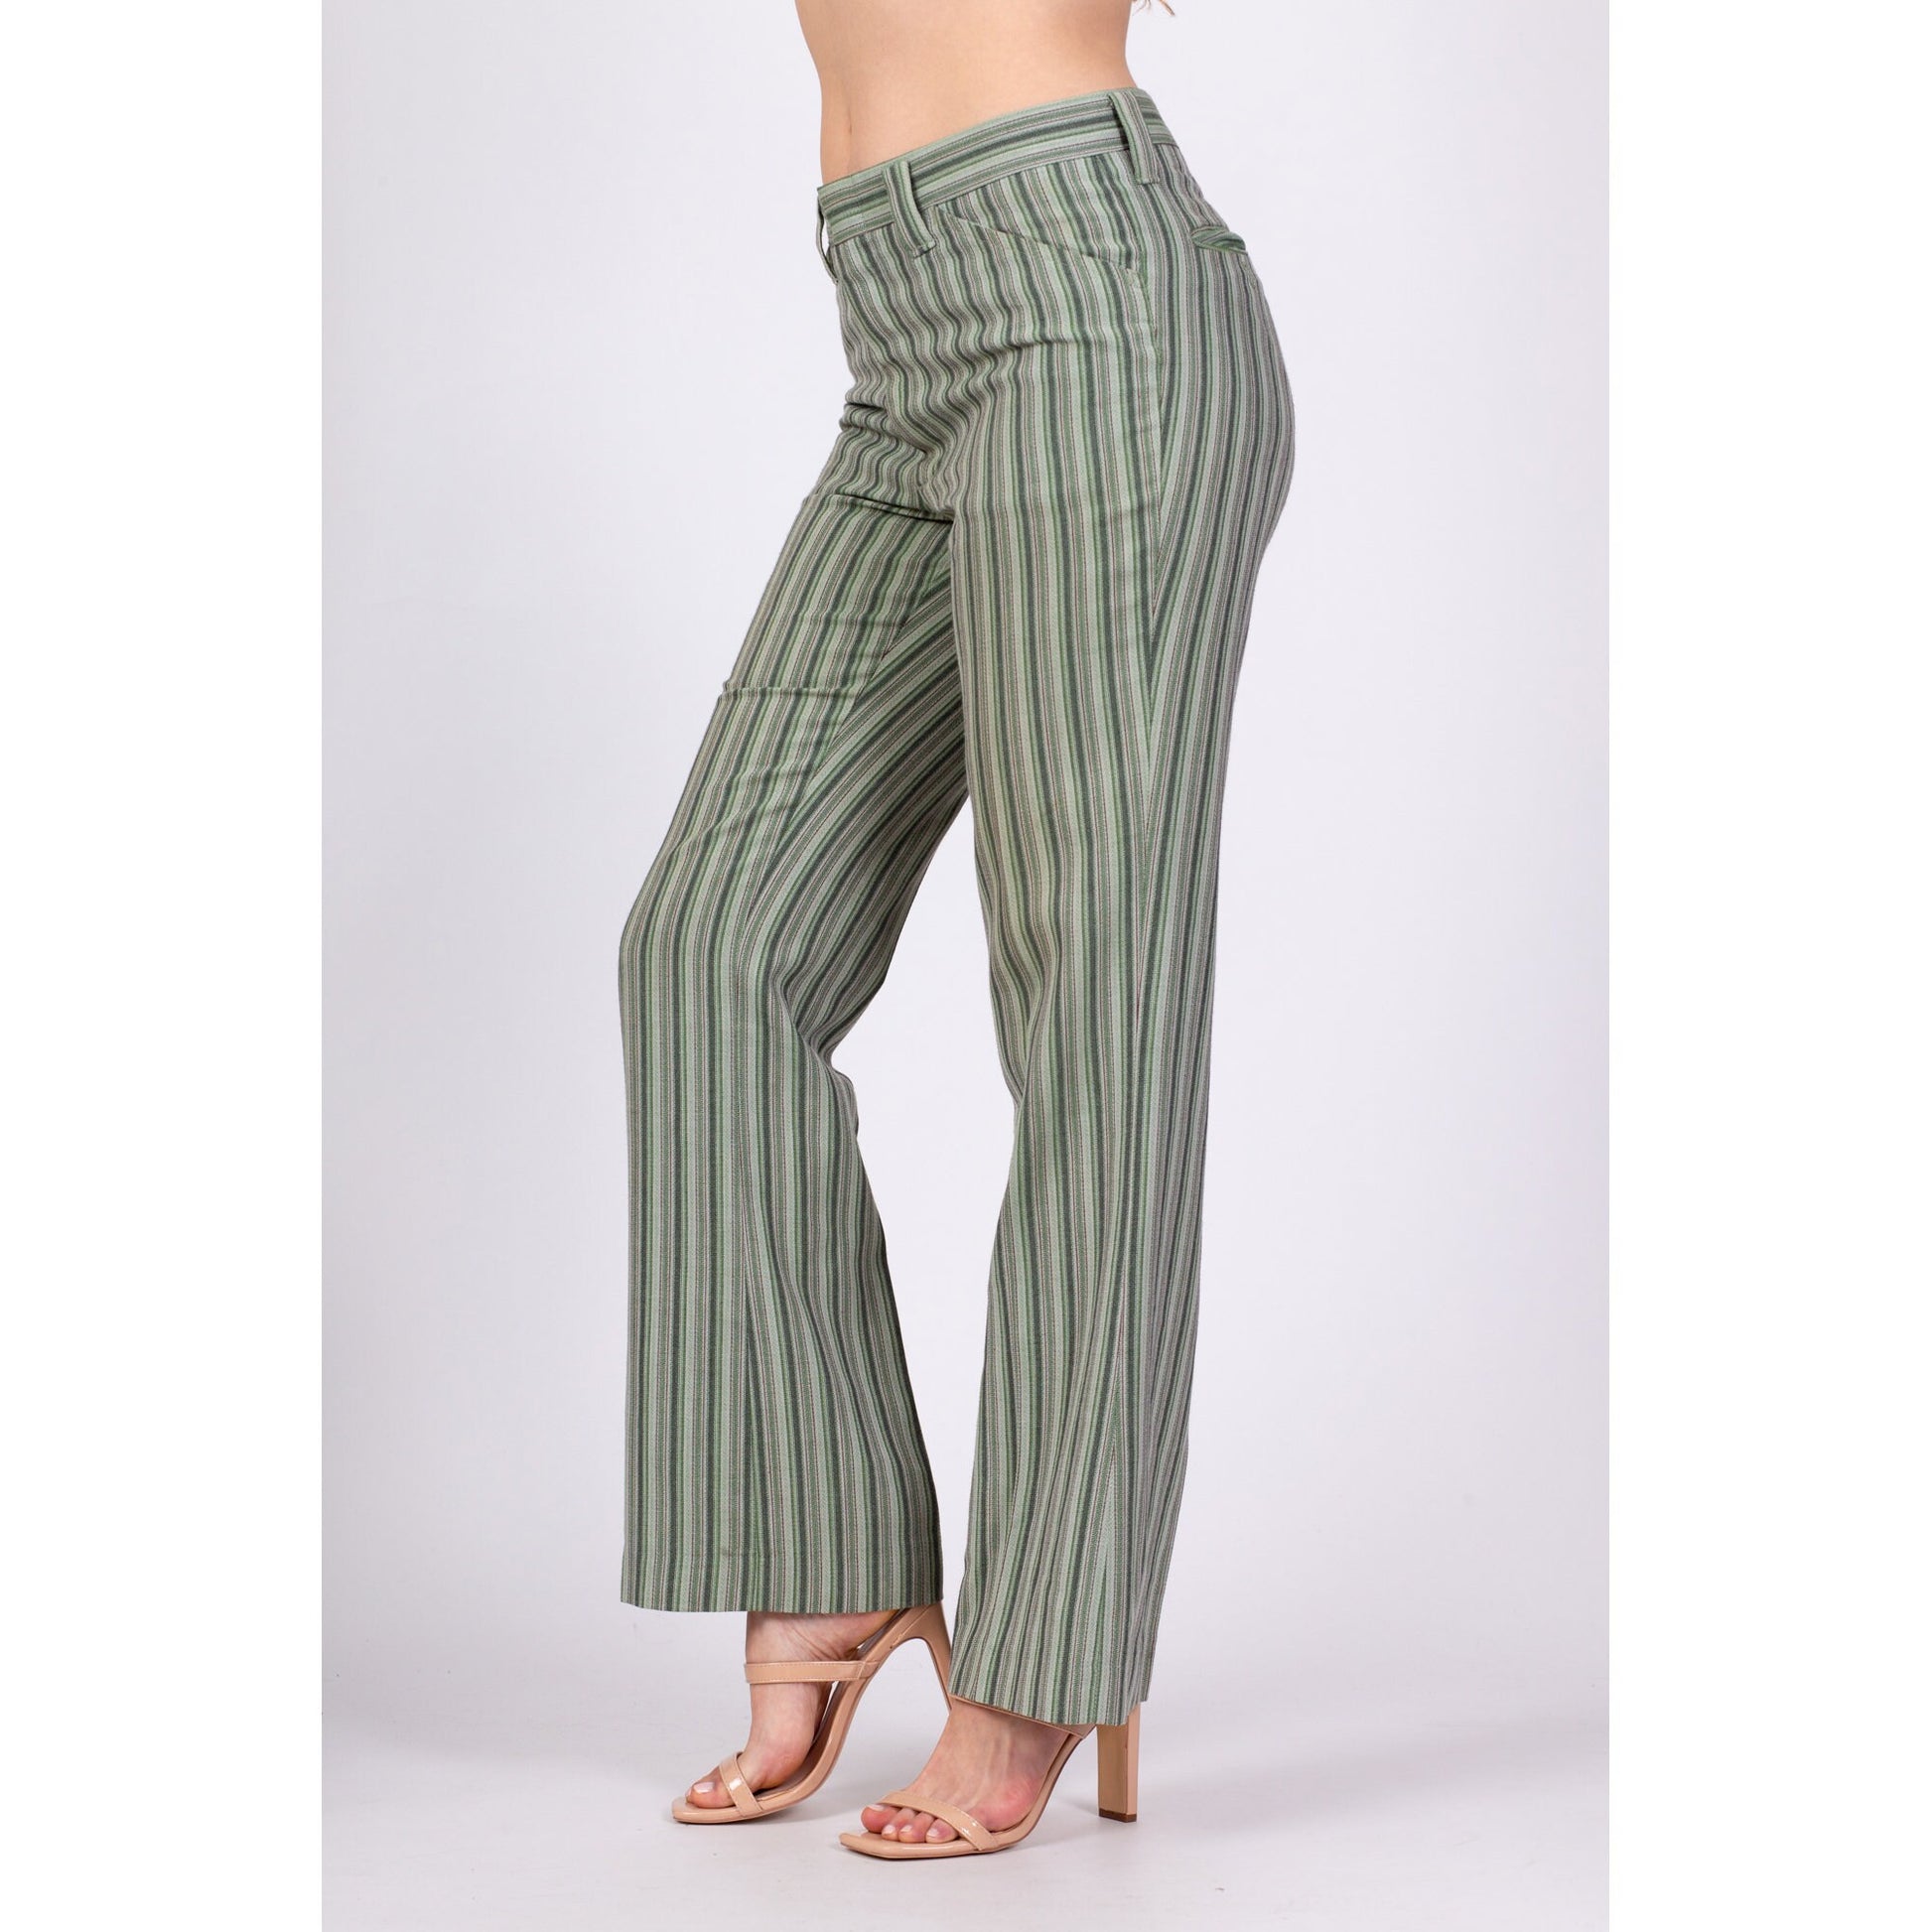 70s Green Striped Mid Rise Unisex Trousers - 32" Waist